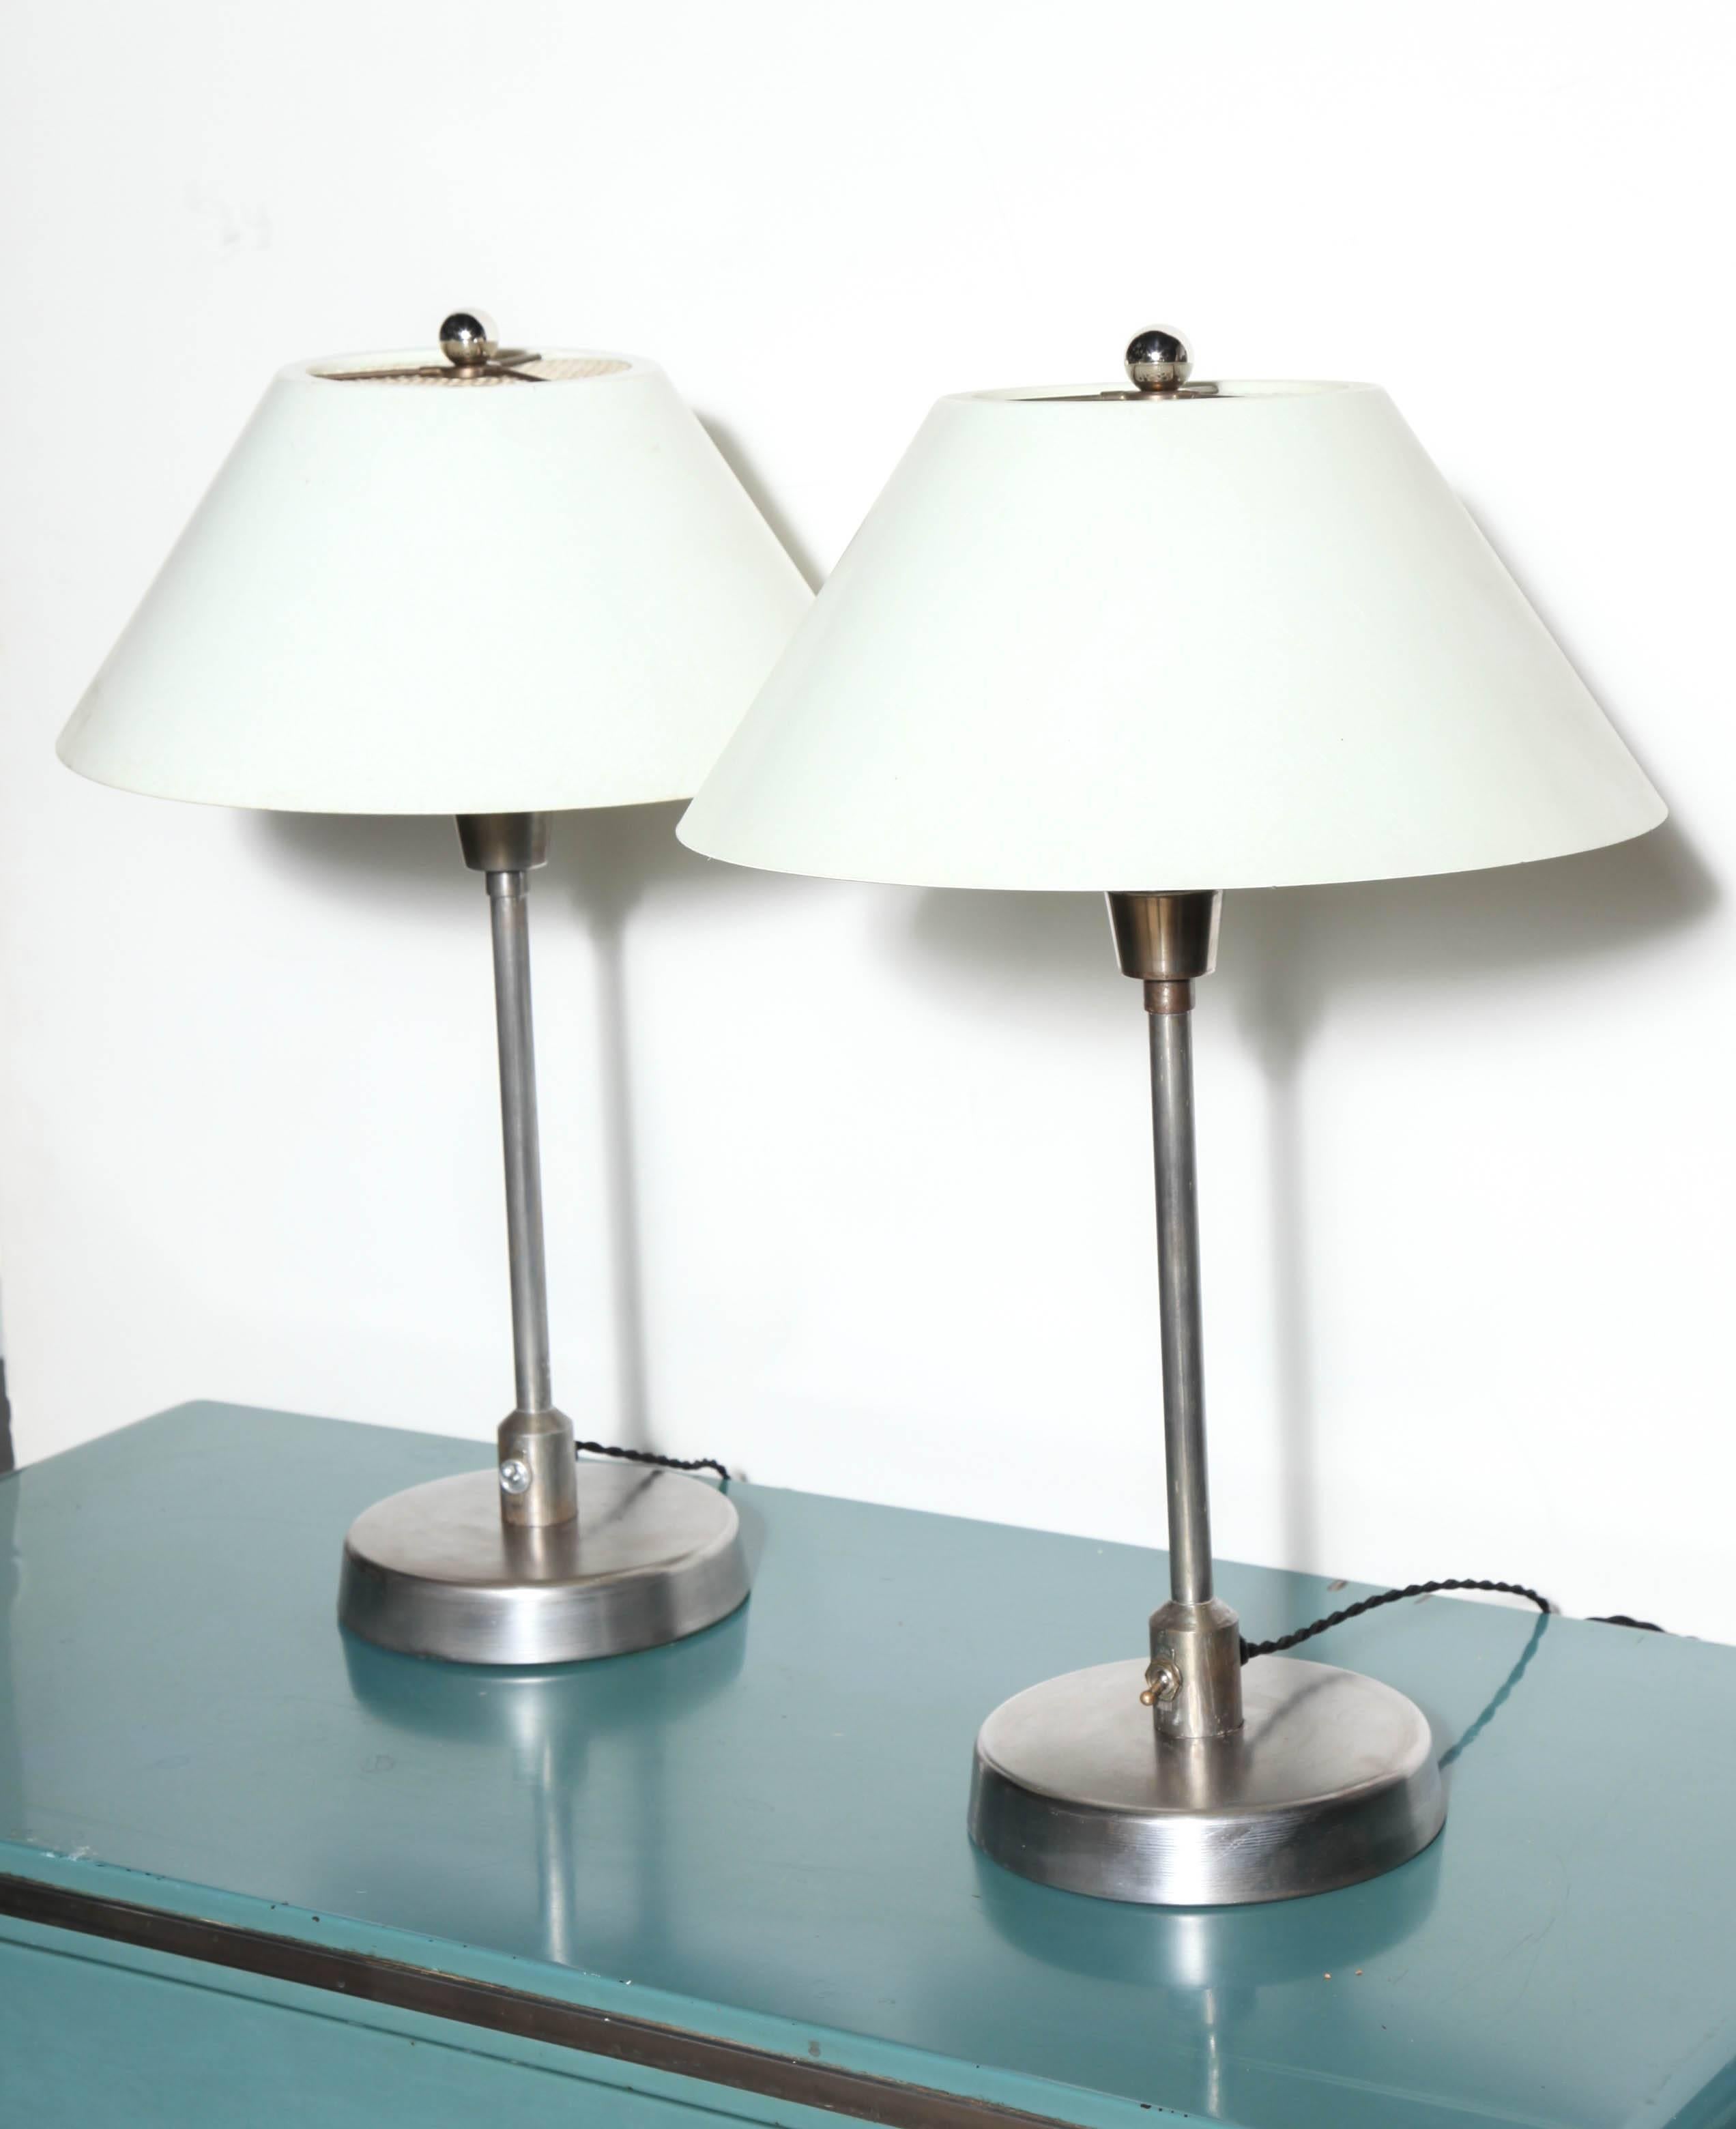 Mid-20th Century Pair of Steel Table Lamps with Cream Fiberglass Shades, 1950's For Sale